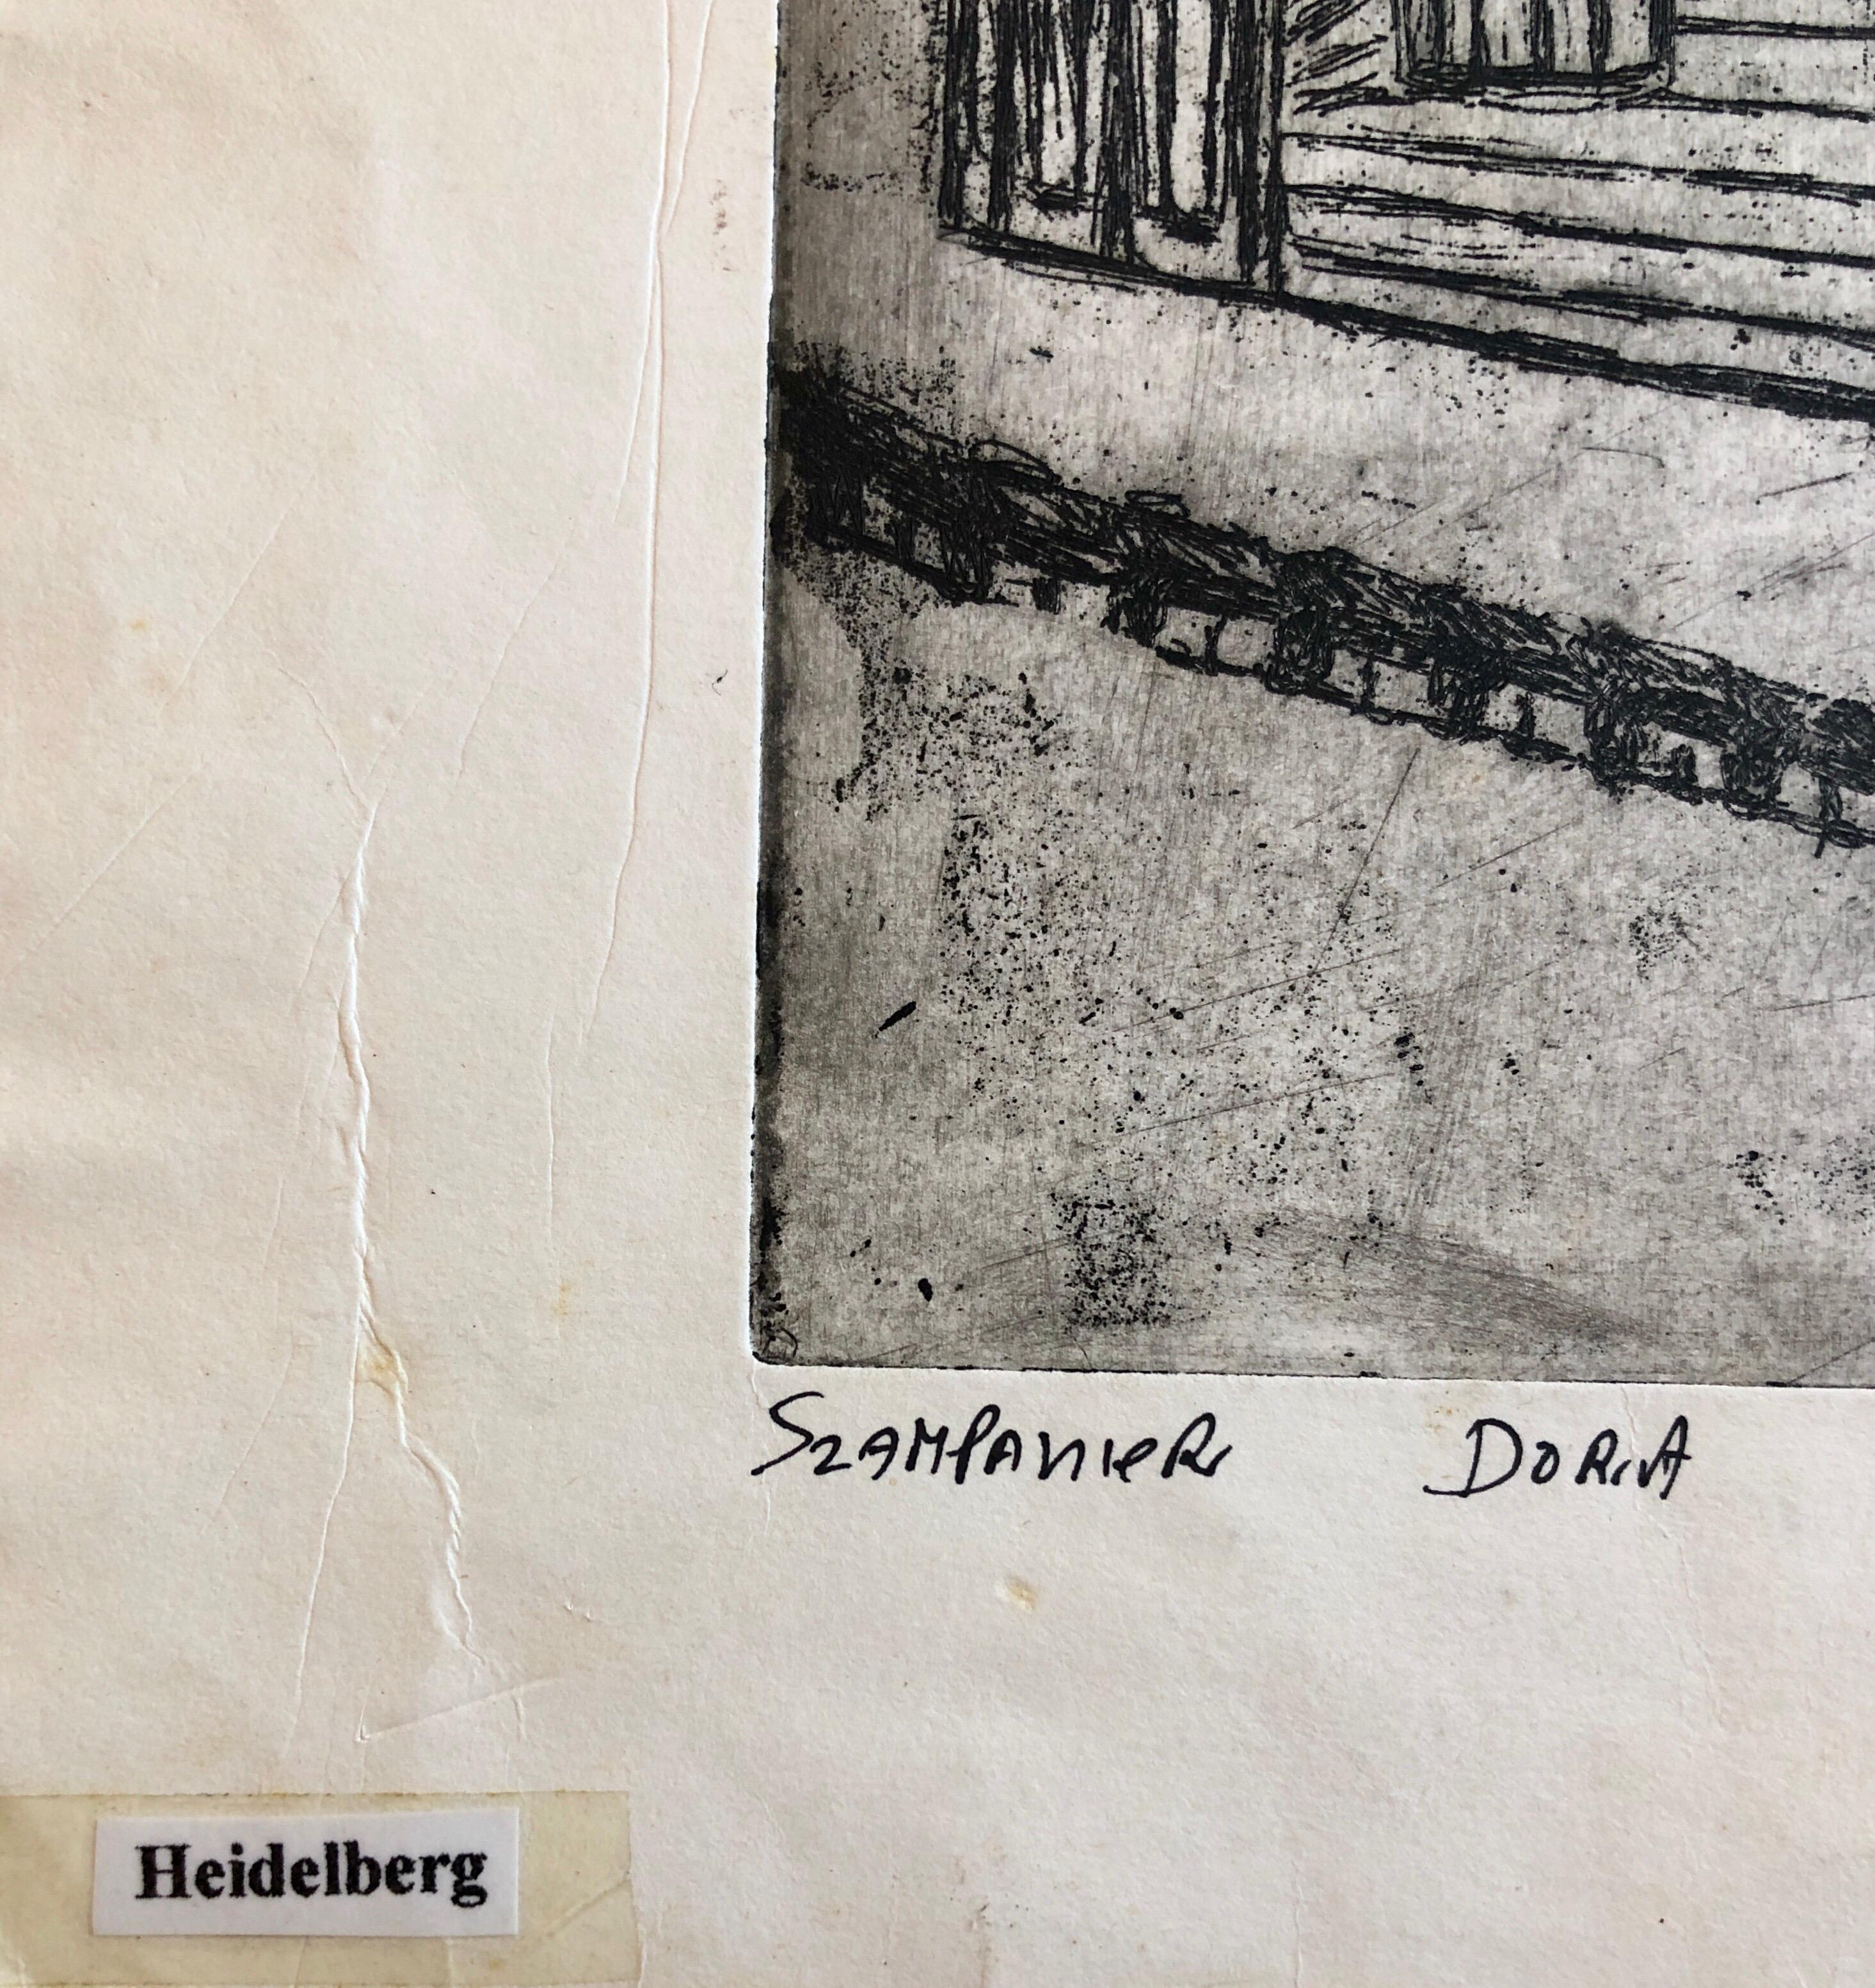 Heidelberg Germany Etching of Synagogue, Jewish temple. From very rare small edition. Most are signed in Hebrew and /or English. some are marked AP some are numbered. please see photos.
Dora Szampanier (Shampanier, nee Mondschein) born 1922, a